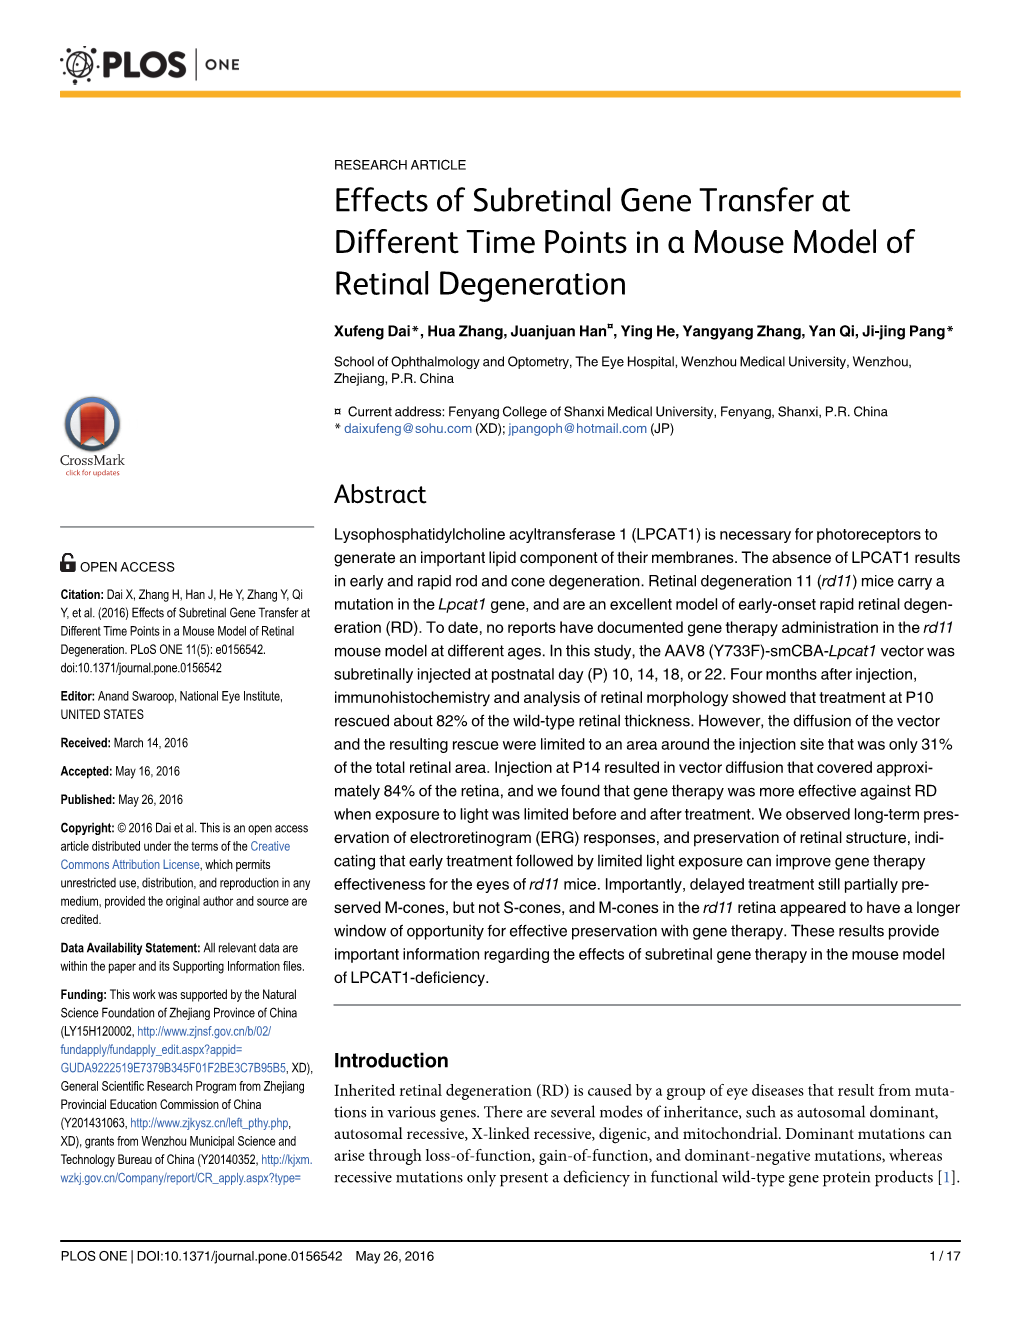 Effects of Subretinal Gene Transfer at Different Time Points in a Mouse Model of Retinal Degeneration